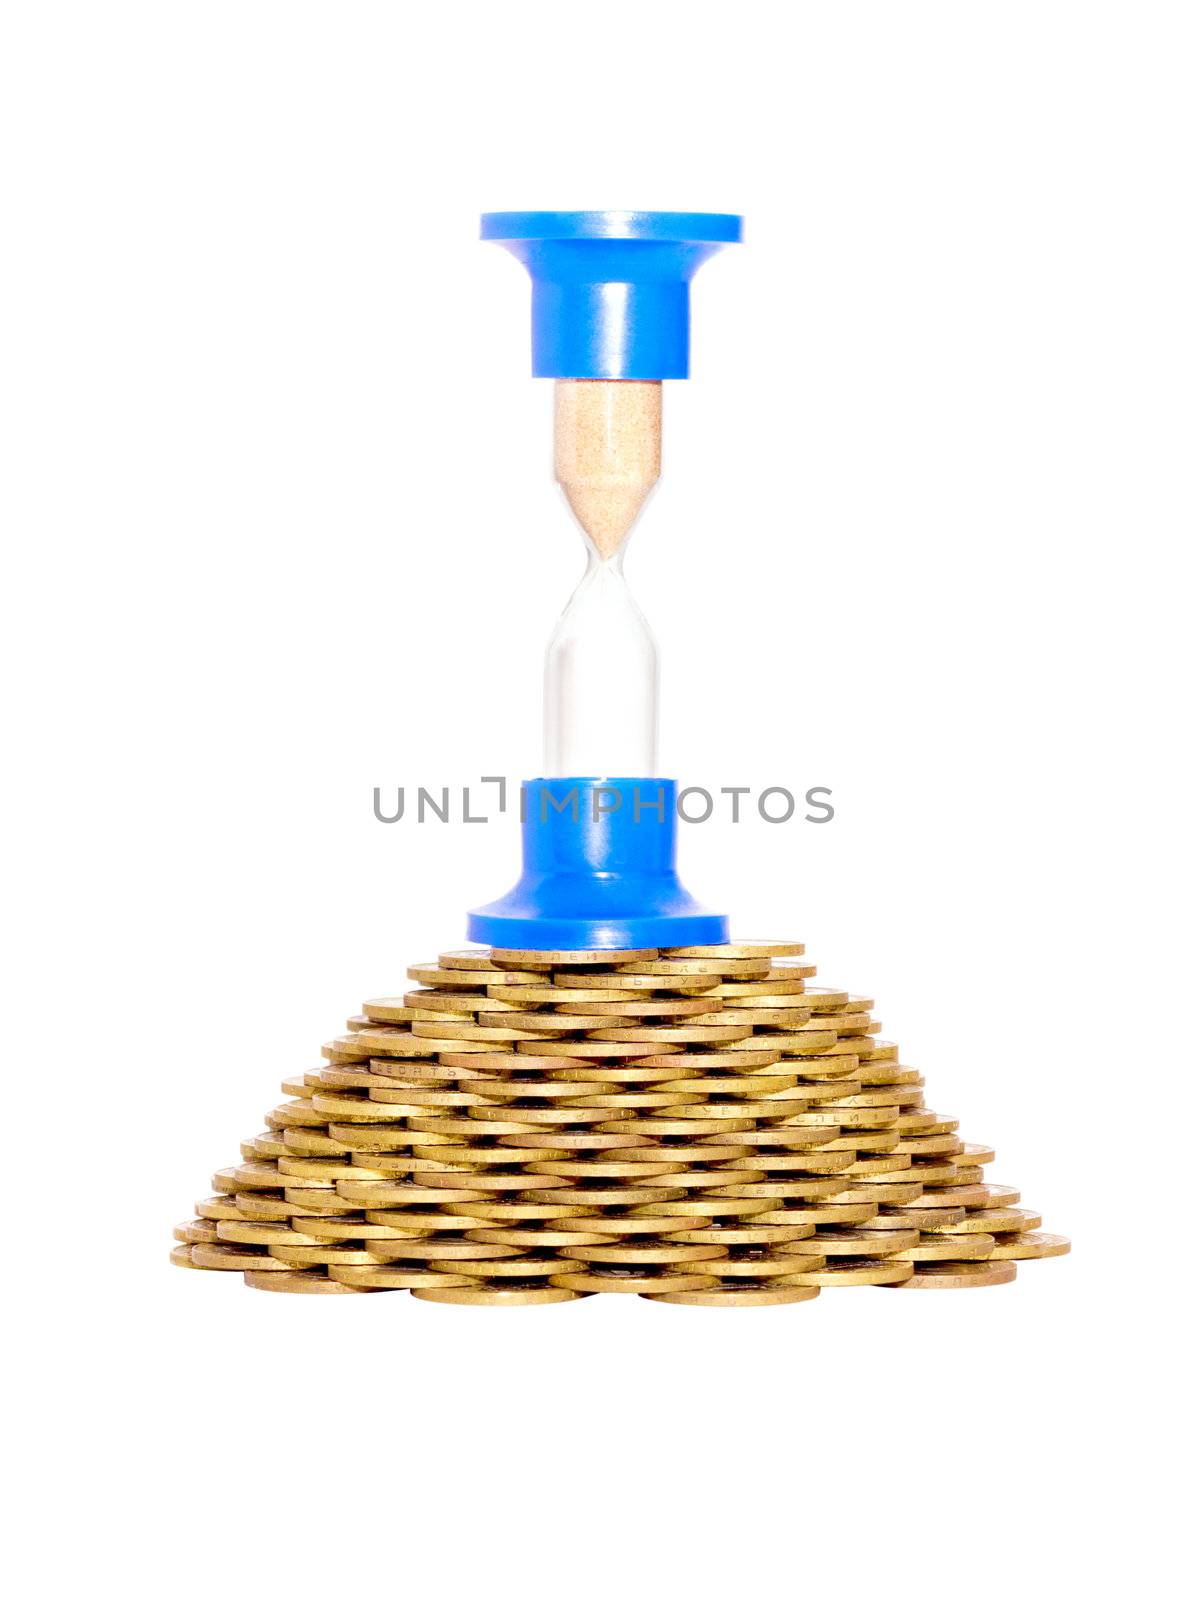 hourglass on a pyramid of coins by Plus69